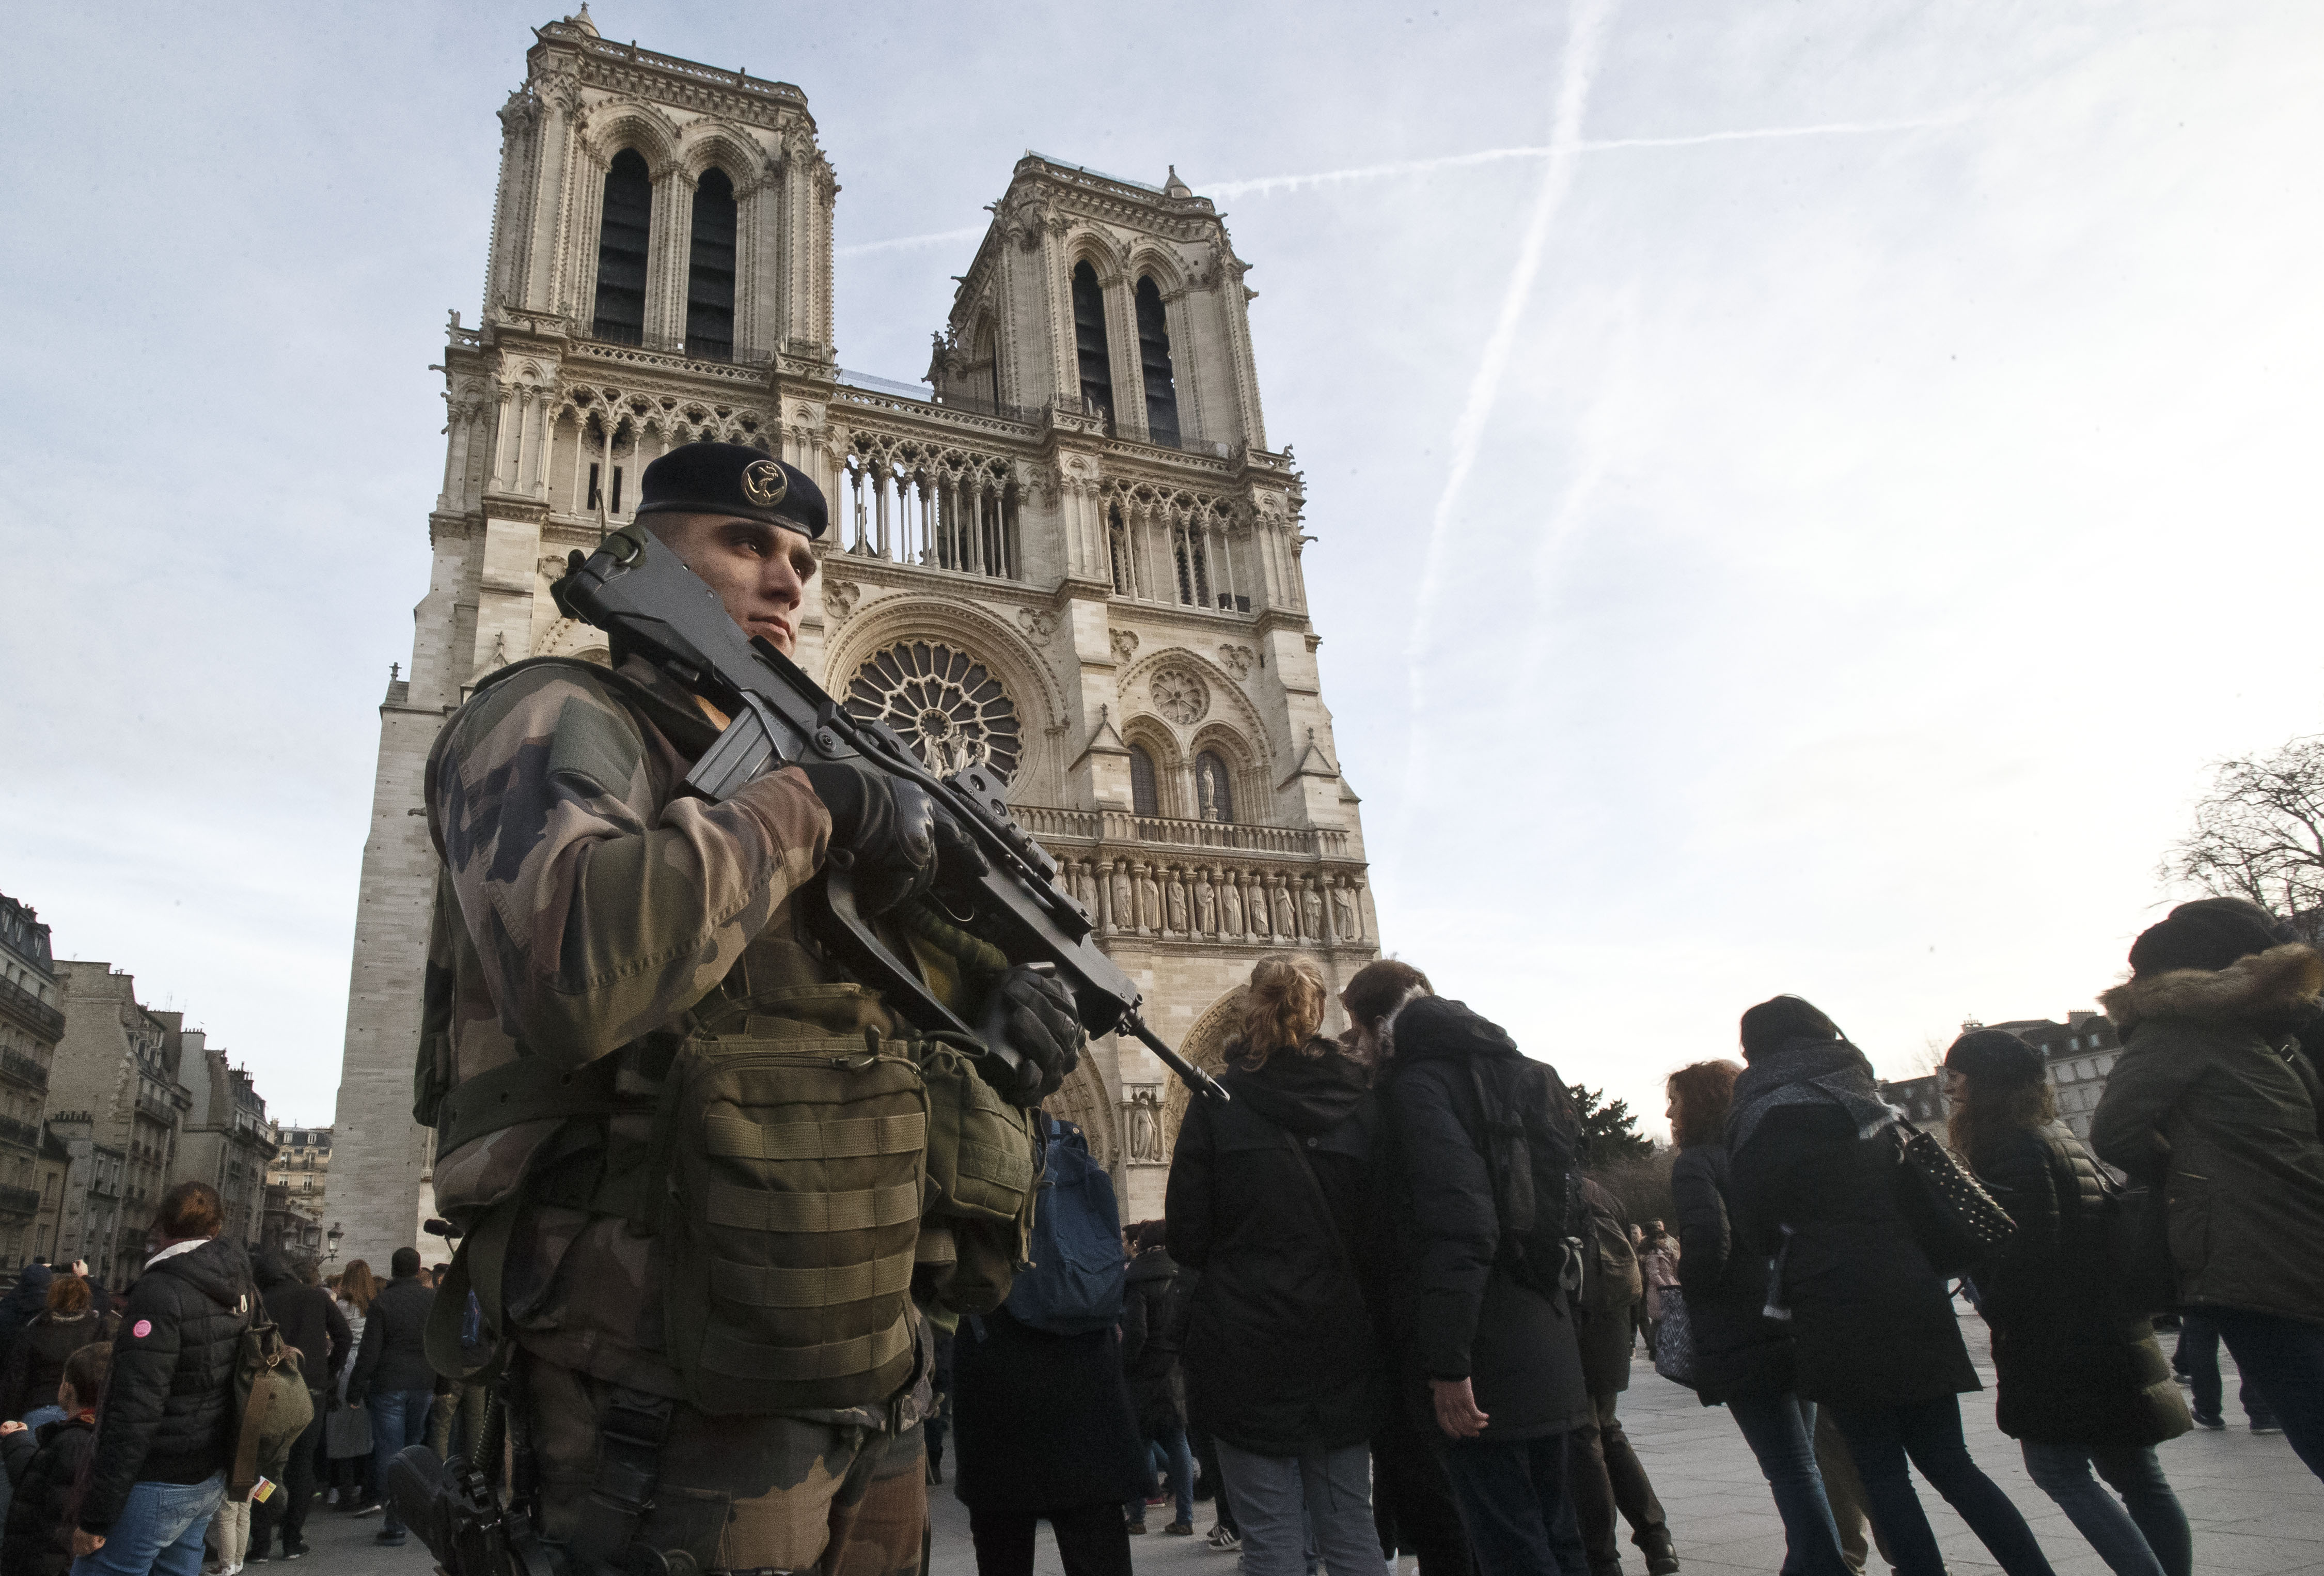 A soldier patrols at the Notre Dame cathedral in Paris, Wednesday. France's defense minister has visited troops on duty ahead of unusually tense New Year's Eve celebrations in Paris after November attacks that left 130 dead and hundreds injured. | AP